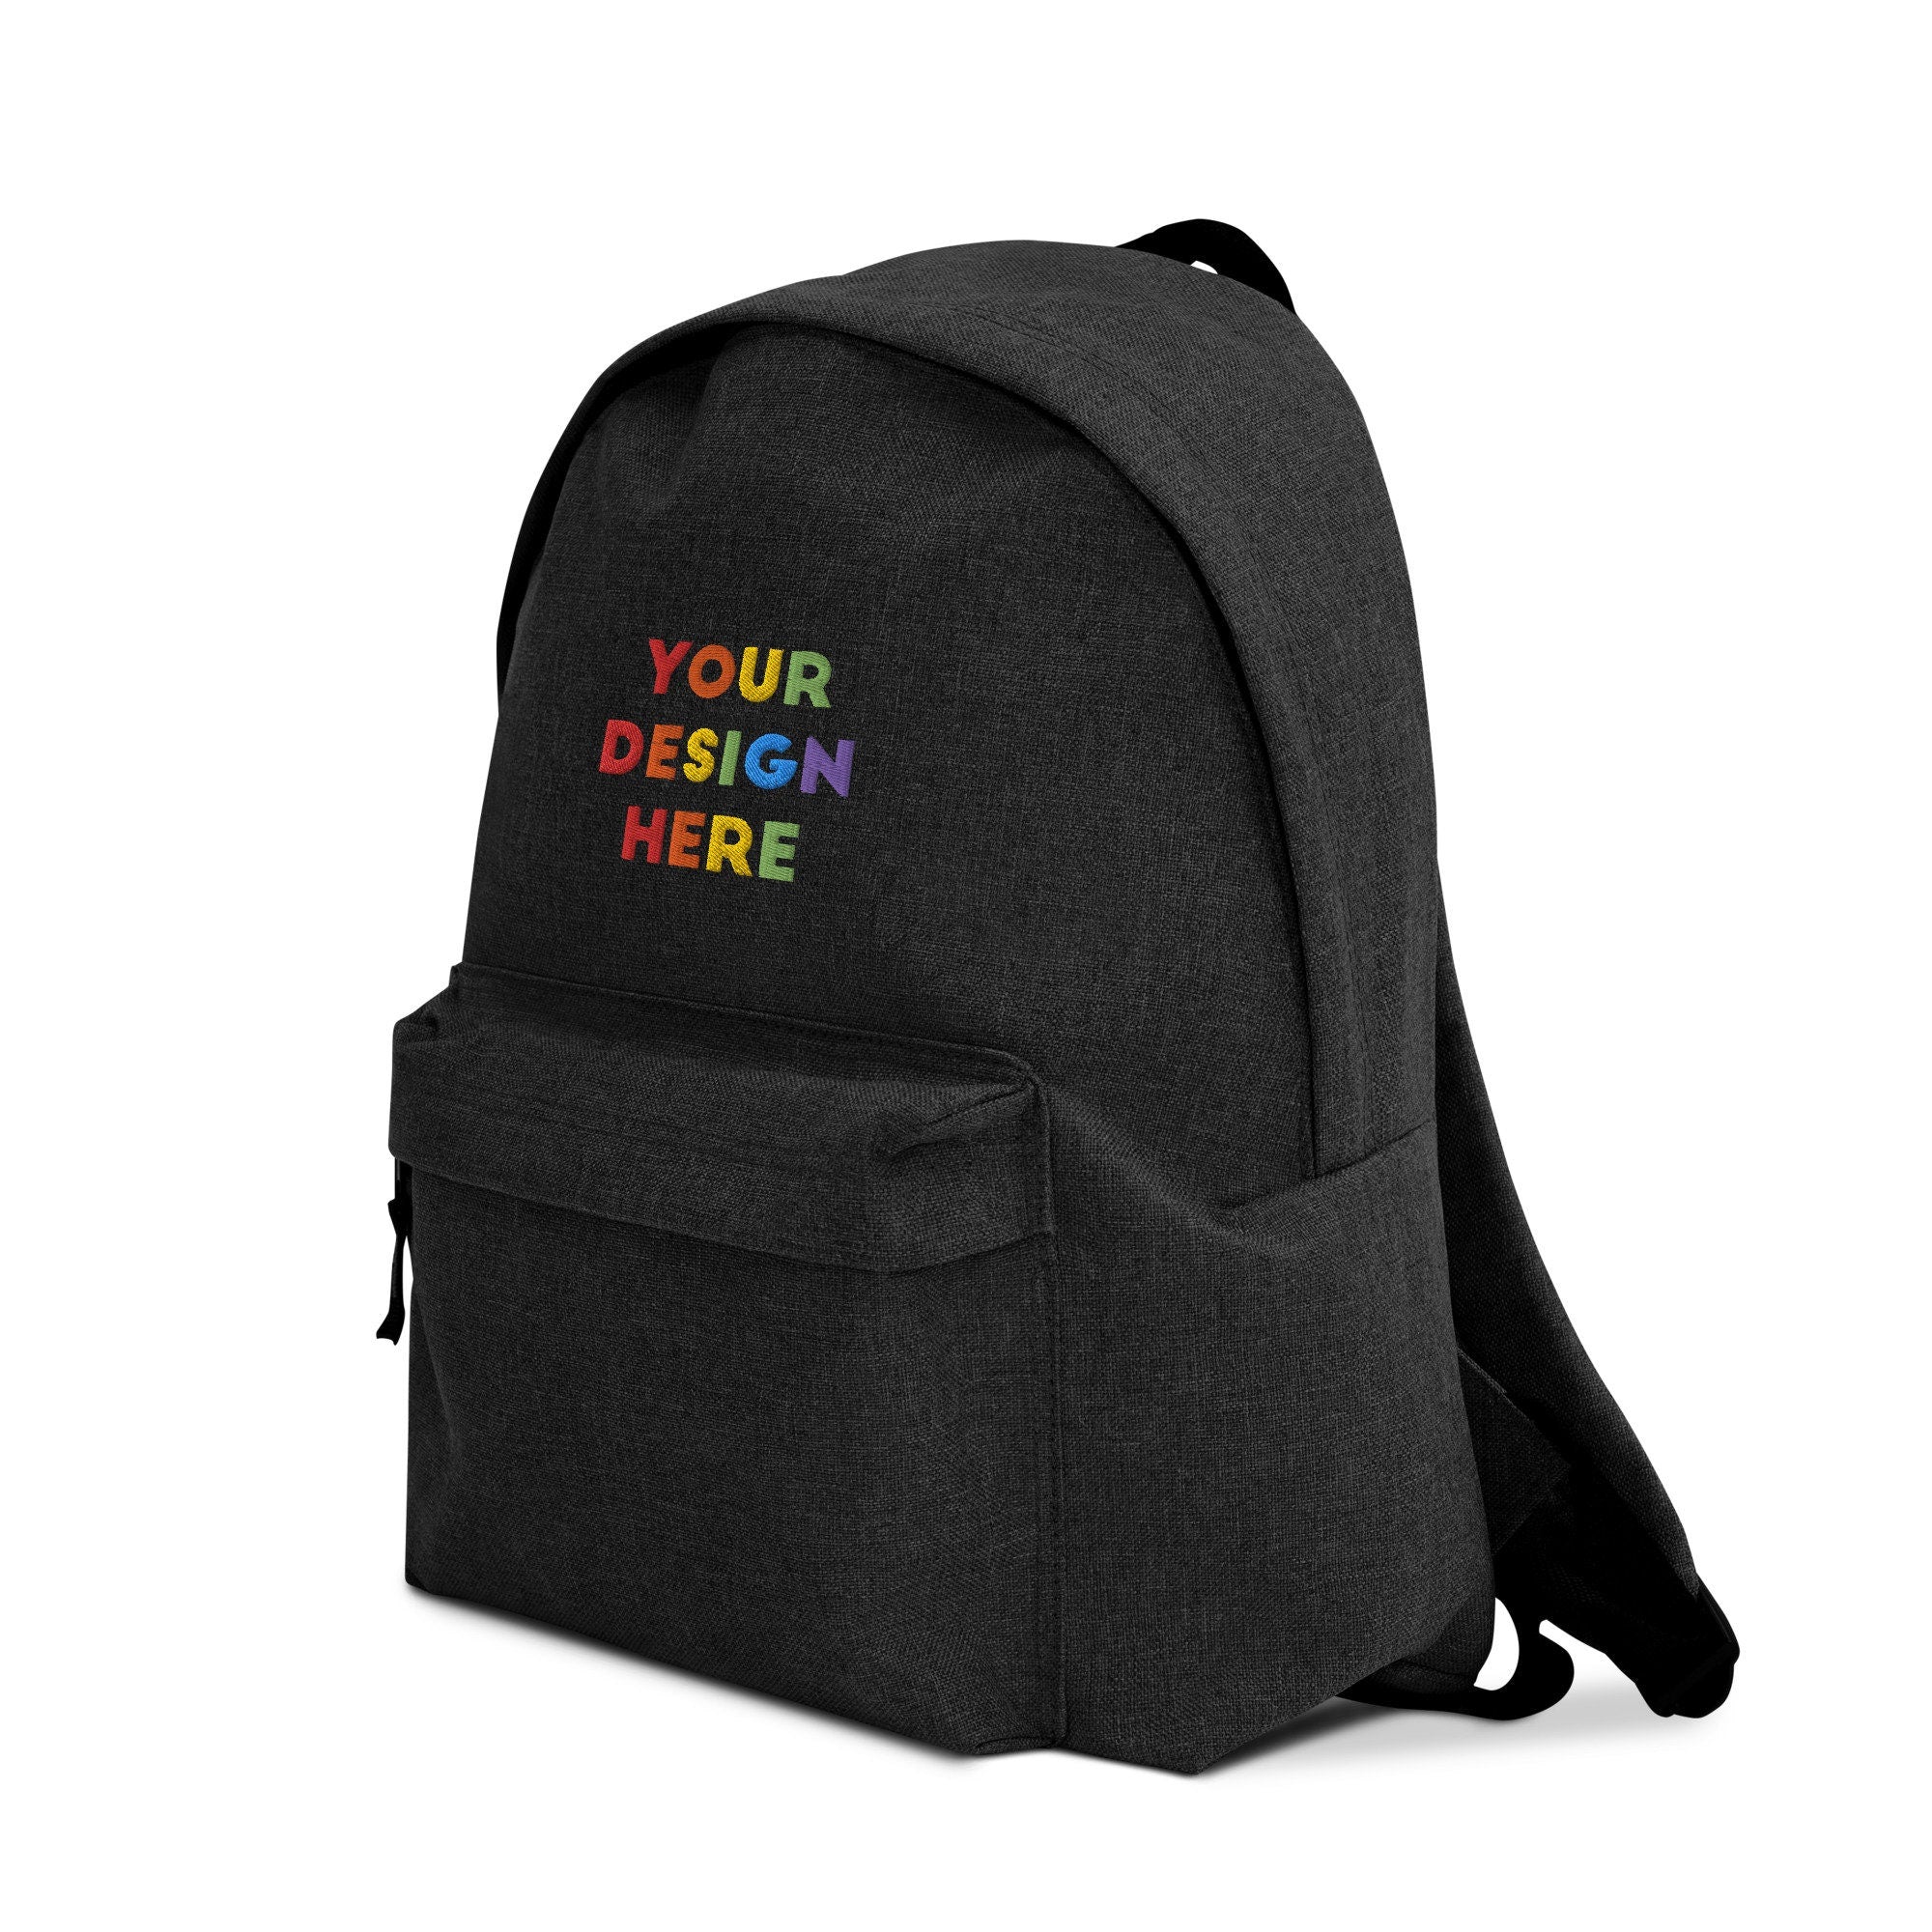 Personalizing Your Bags Or Backpack With Embroidered Patches, by Cre8ive  Skill